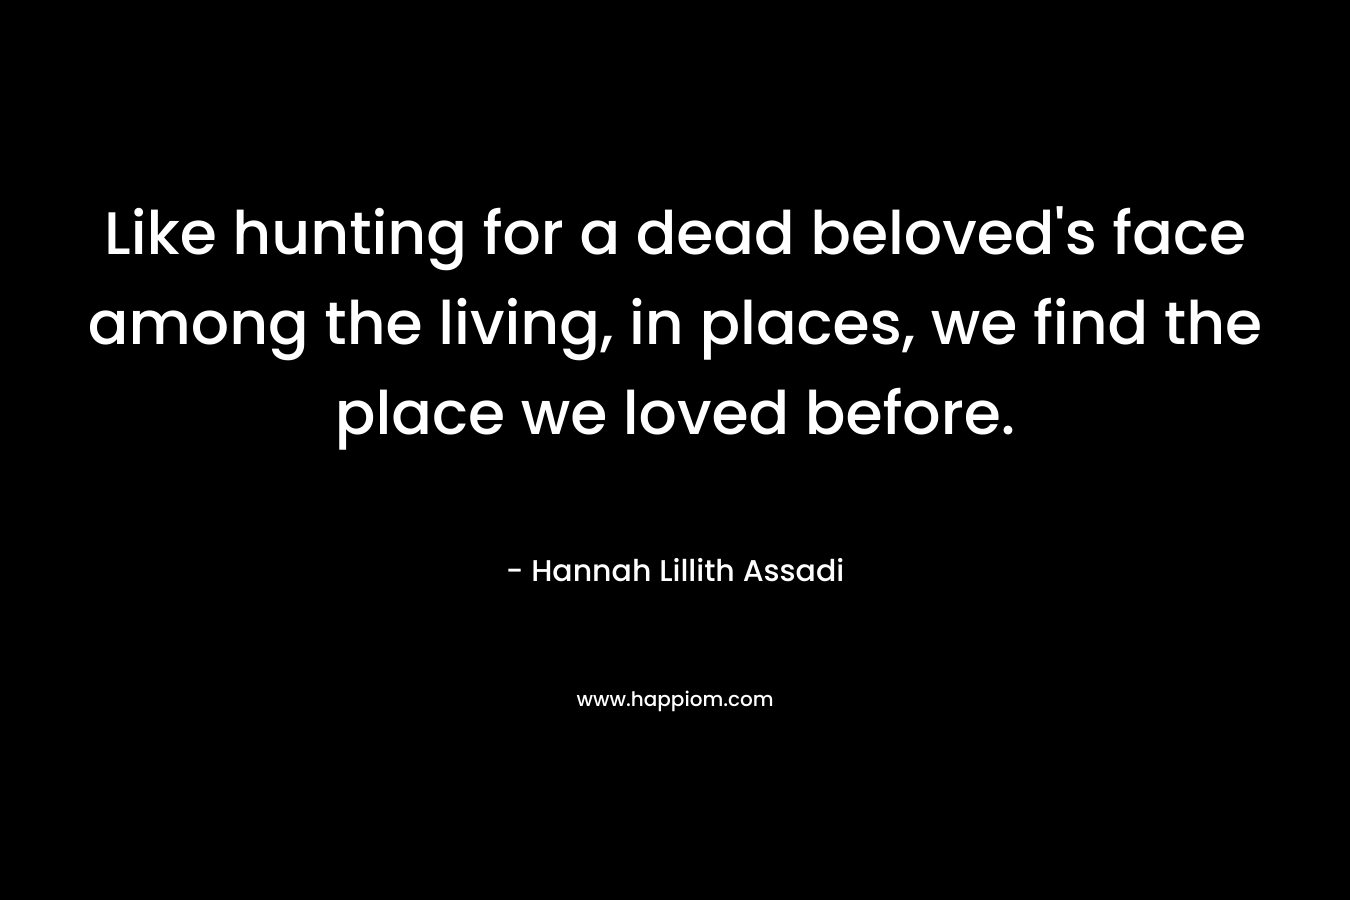 Like hunting for a dead beloved's face among the living, in places, we find the place we loved before.